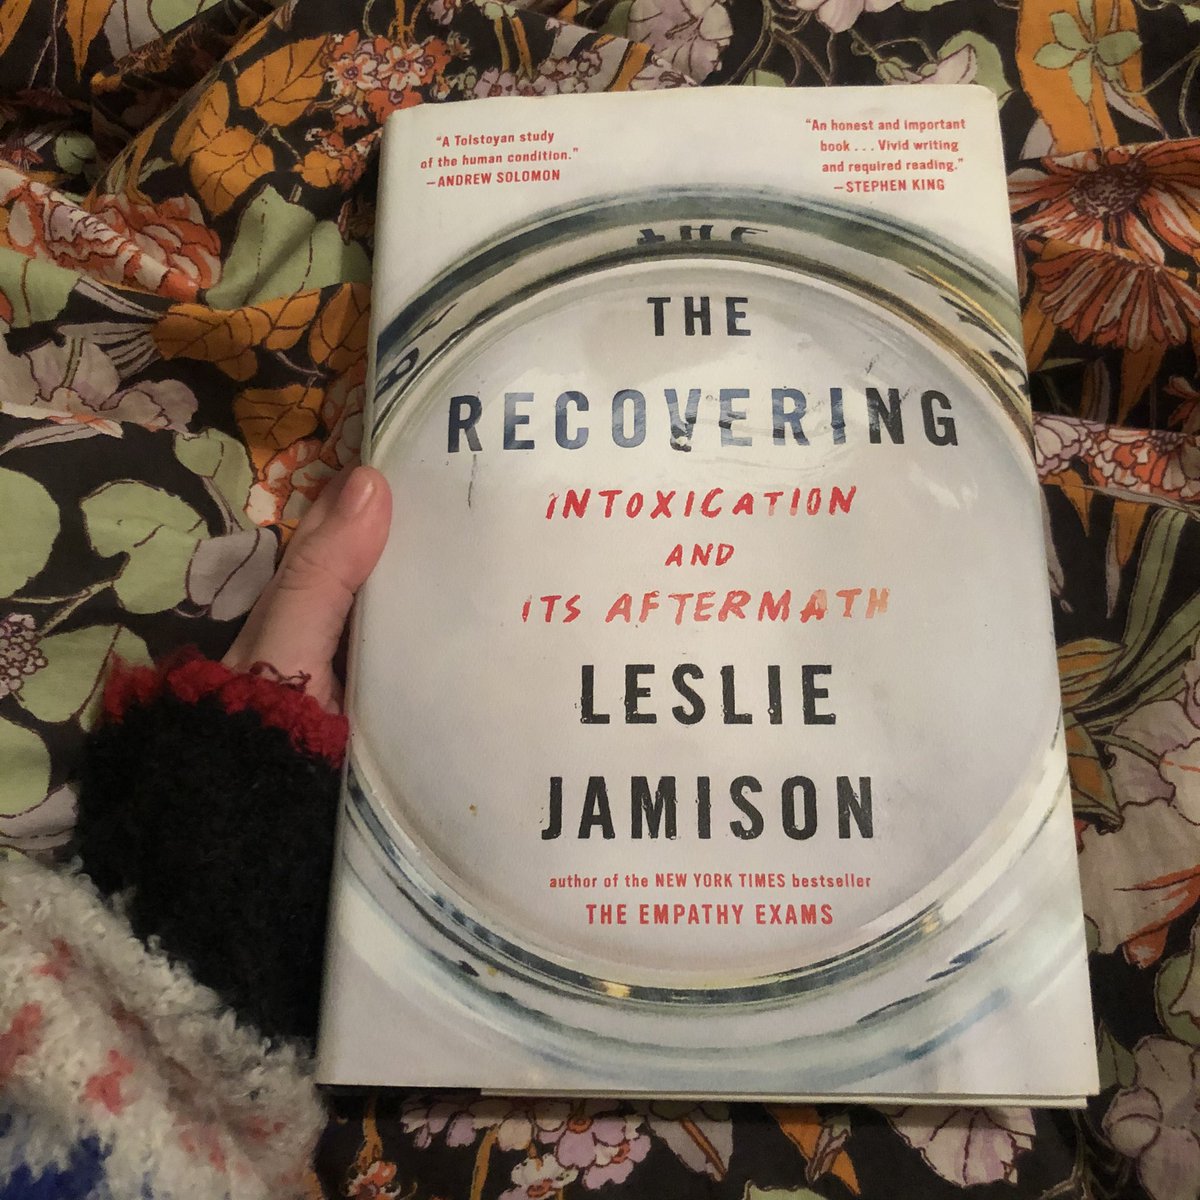 57. The Recovering: Intoxication and Its Aftermath - Leslie Jamison (re-read)